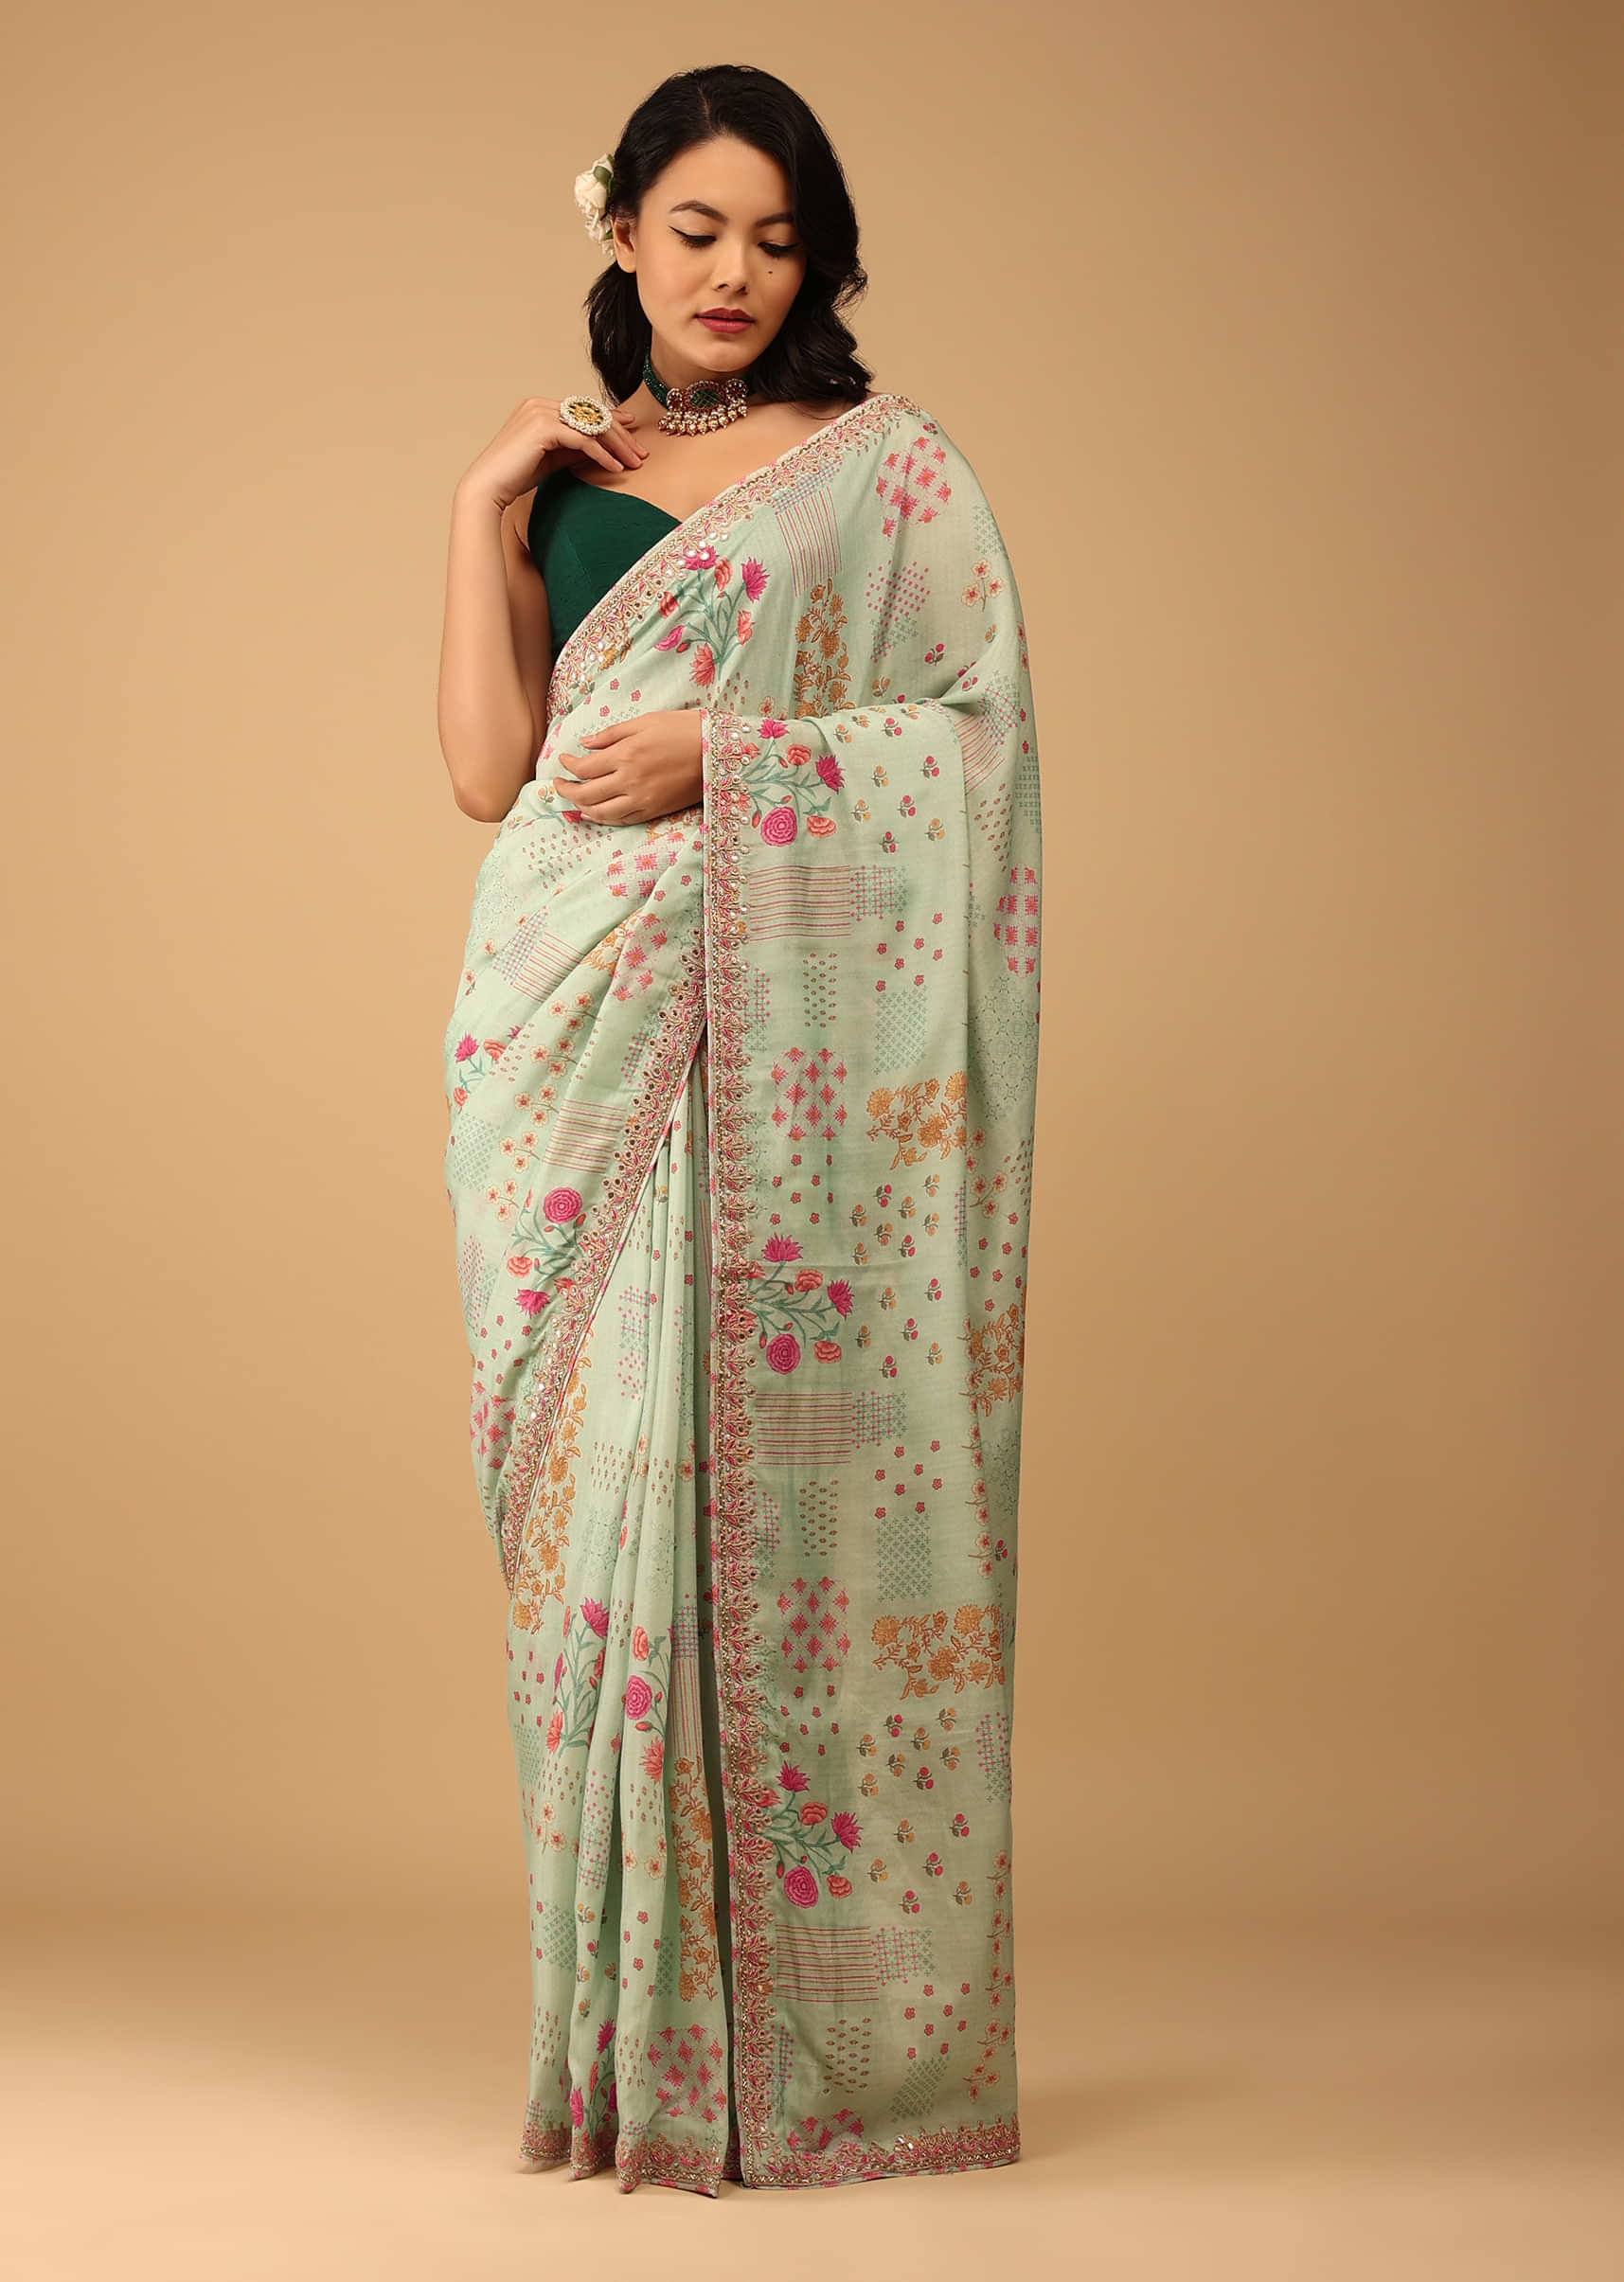 Kalki Gossamer Green Saree In Muslin With Floral Handblock Print And Embroidery